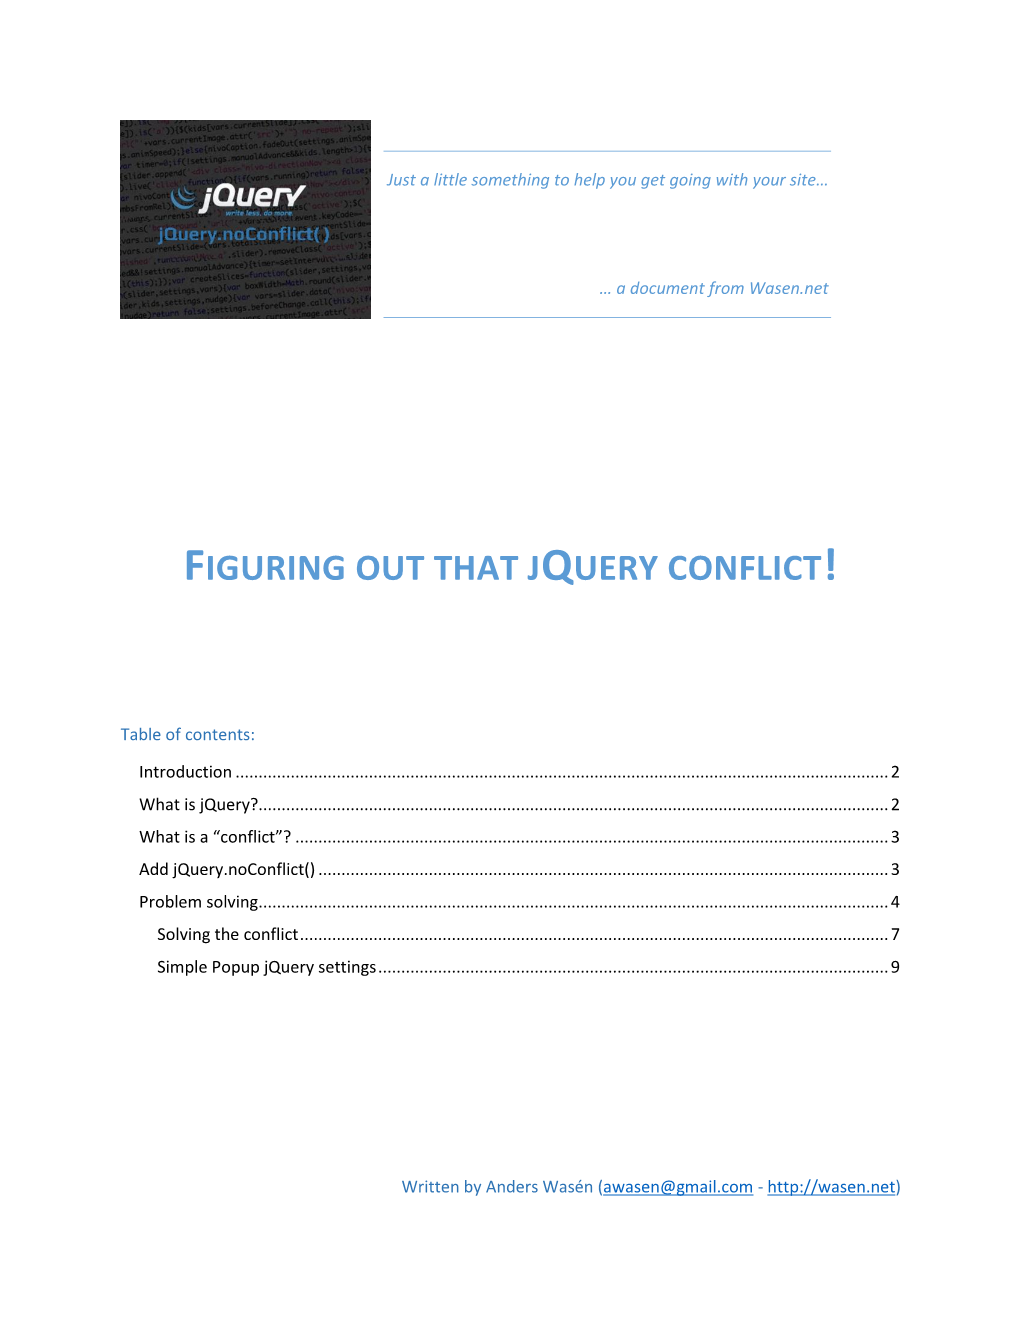 Figuring out That Jquery Conflict!